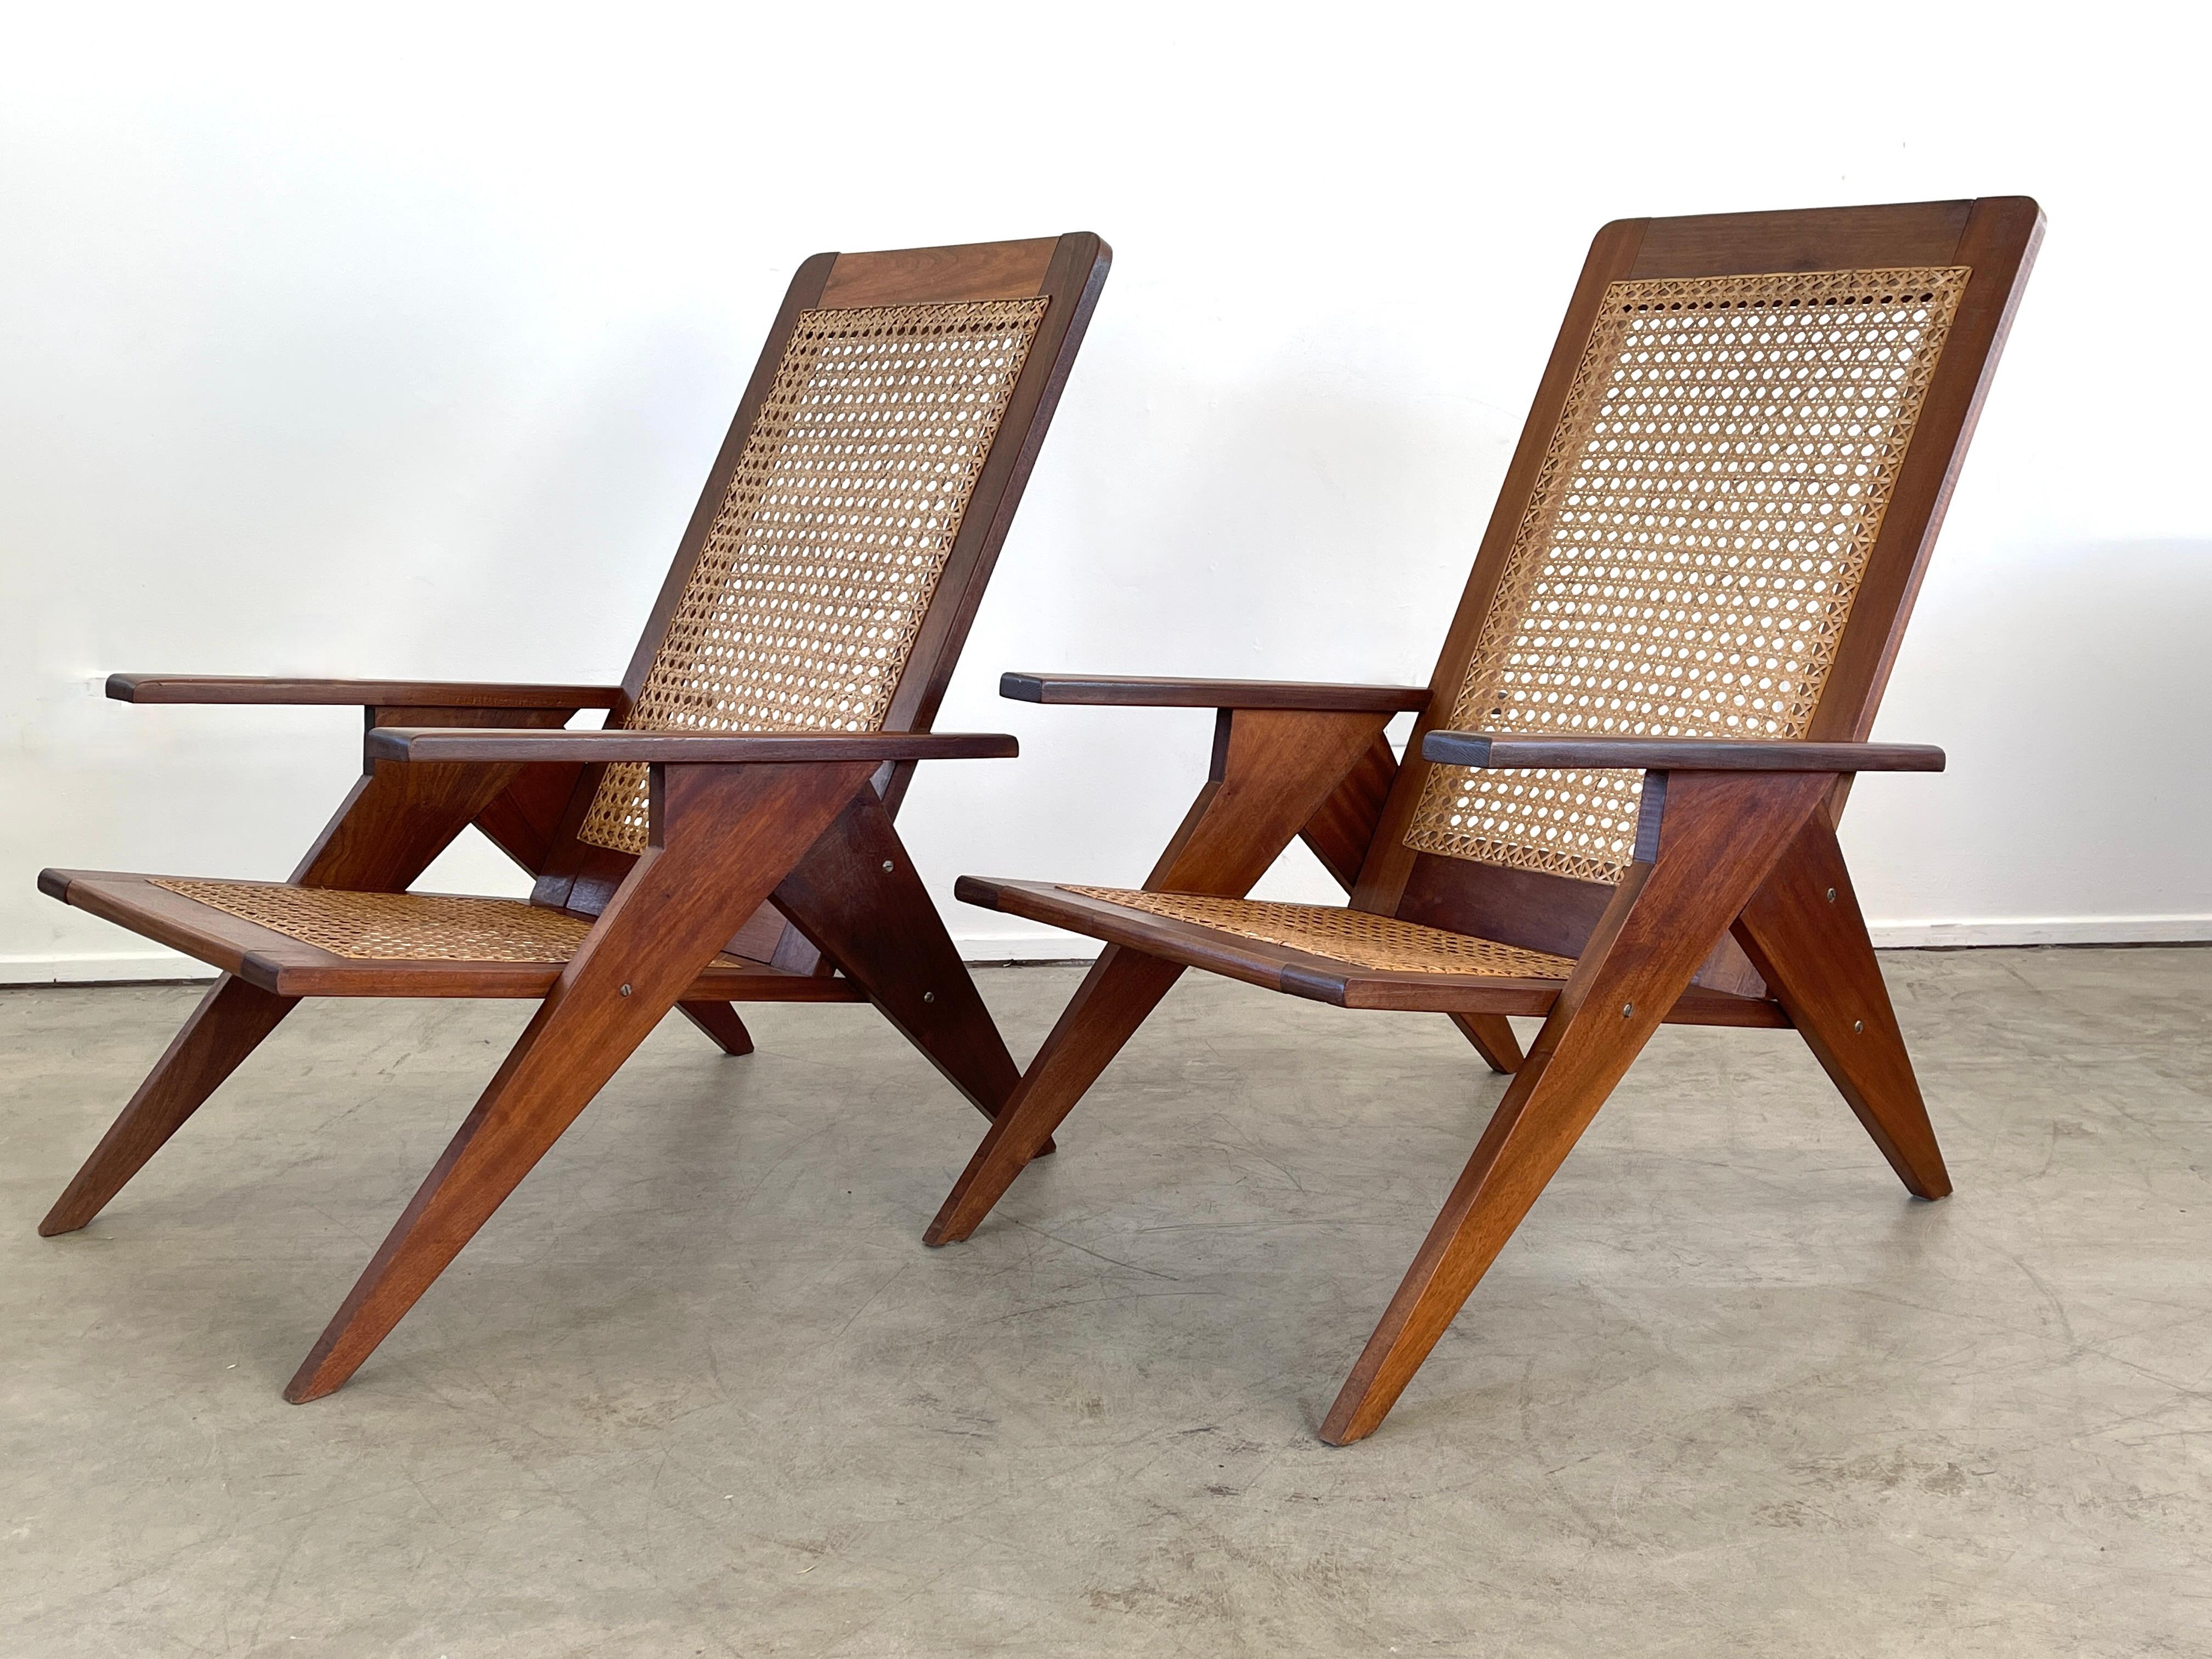 Wonderful pair of caned scissor shaped chairs, France - circa 1950's 
Mahogany frame with original caned seats 
Great angular shape.